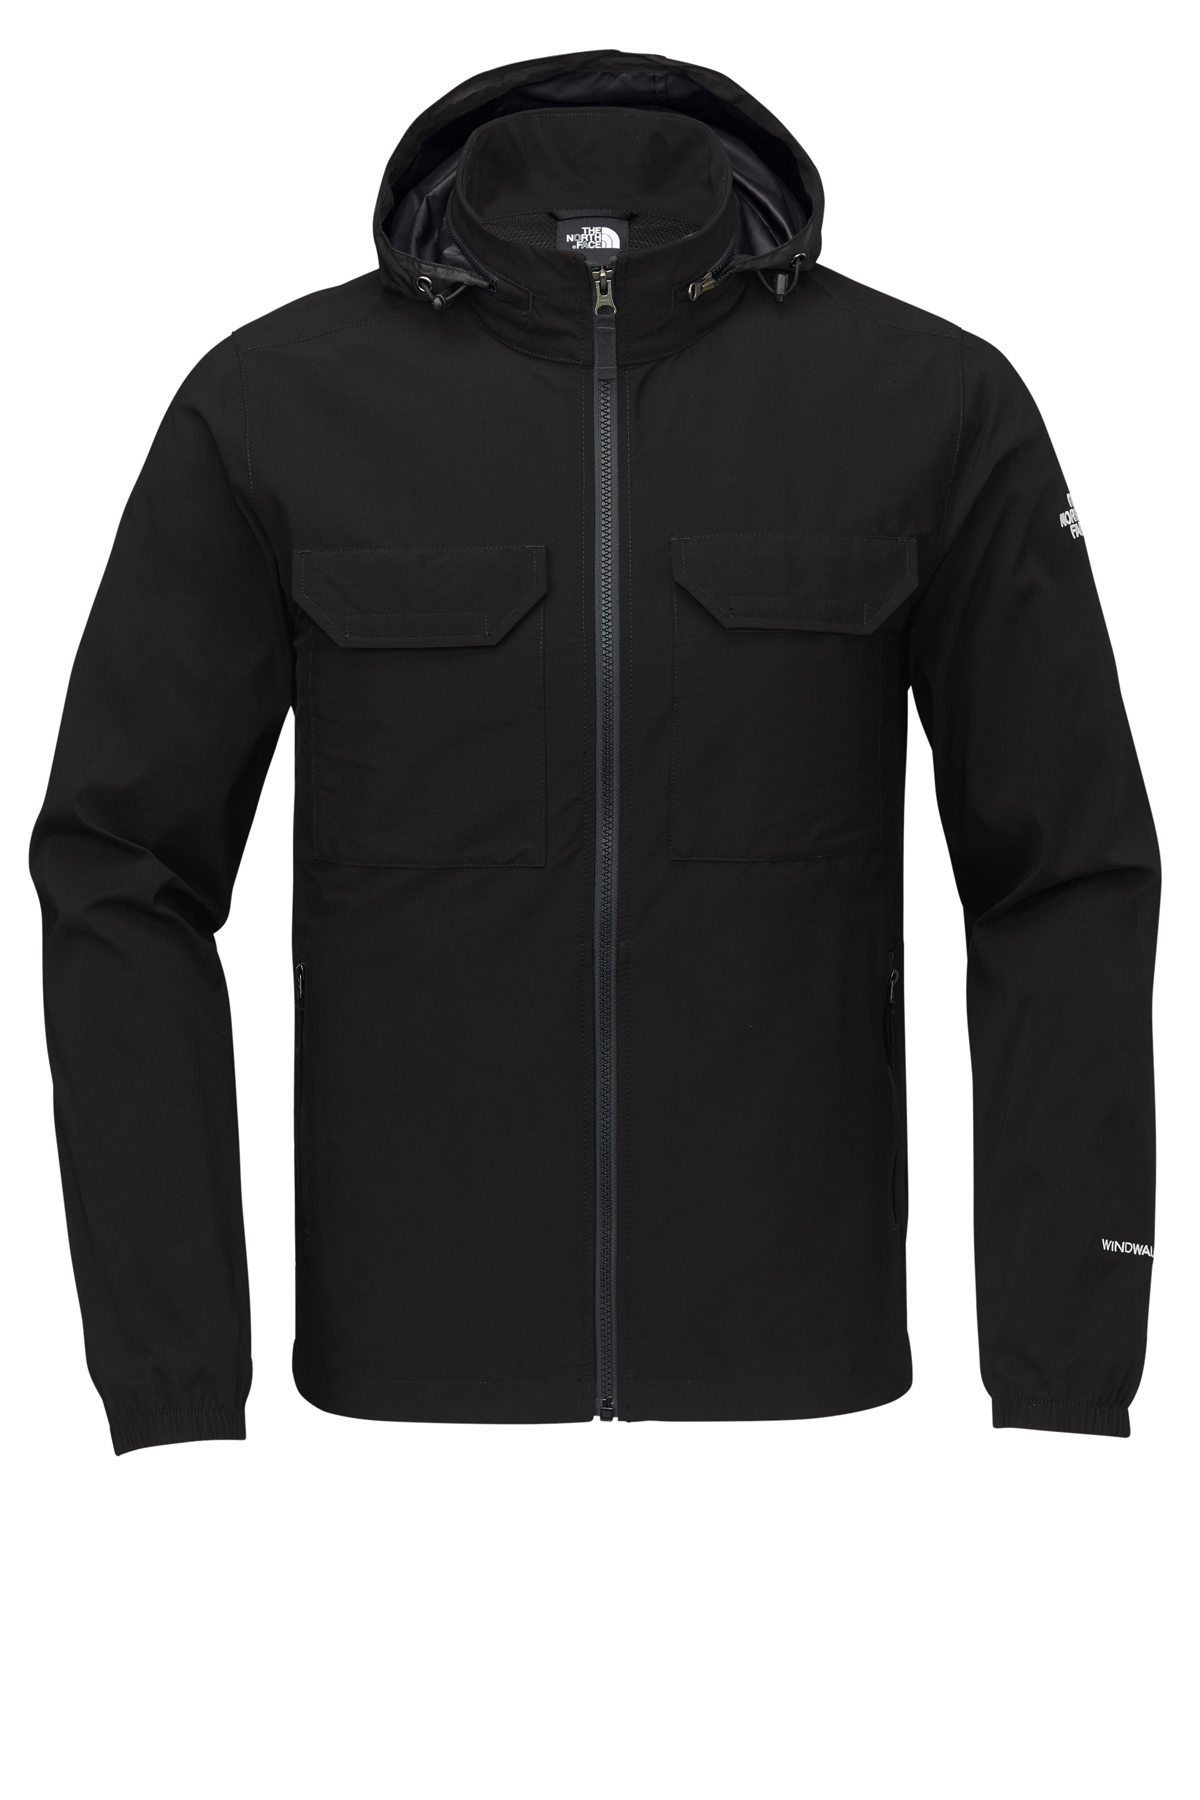 The North Face Packable Travel Jacket | Product | SanMar